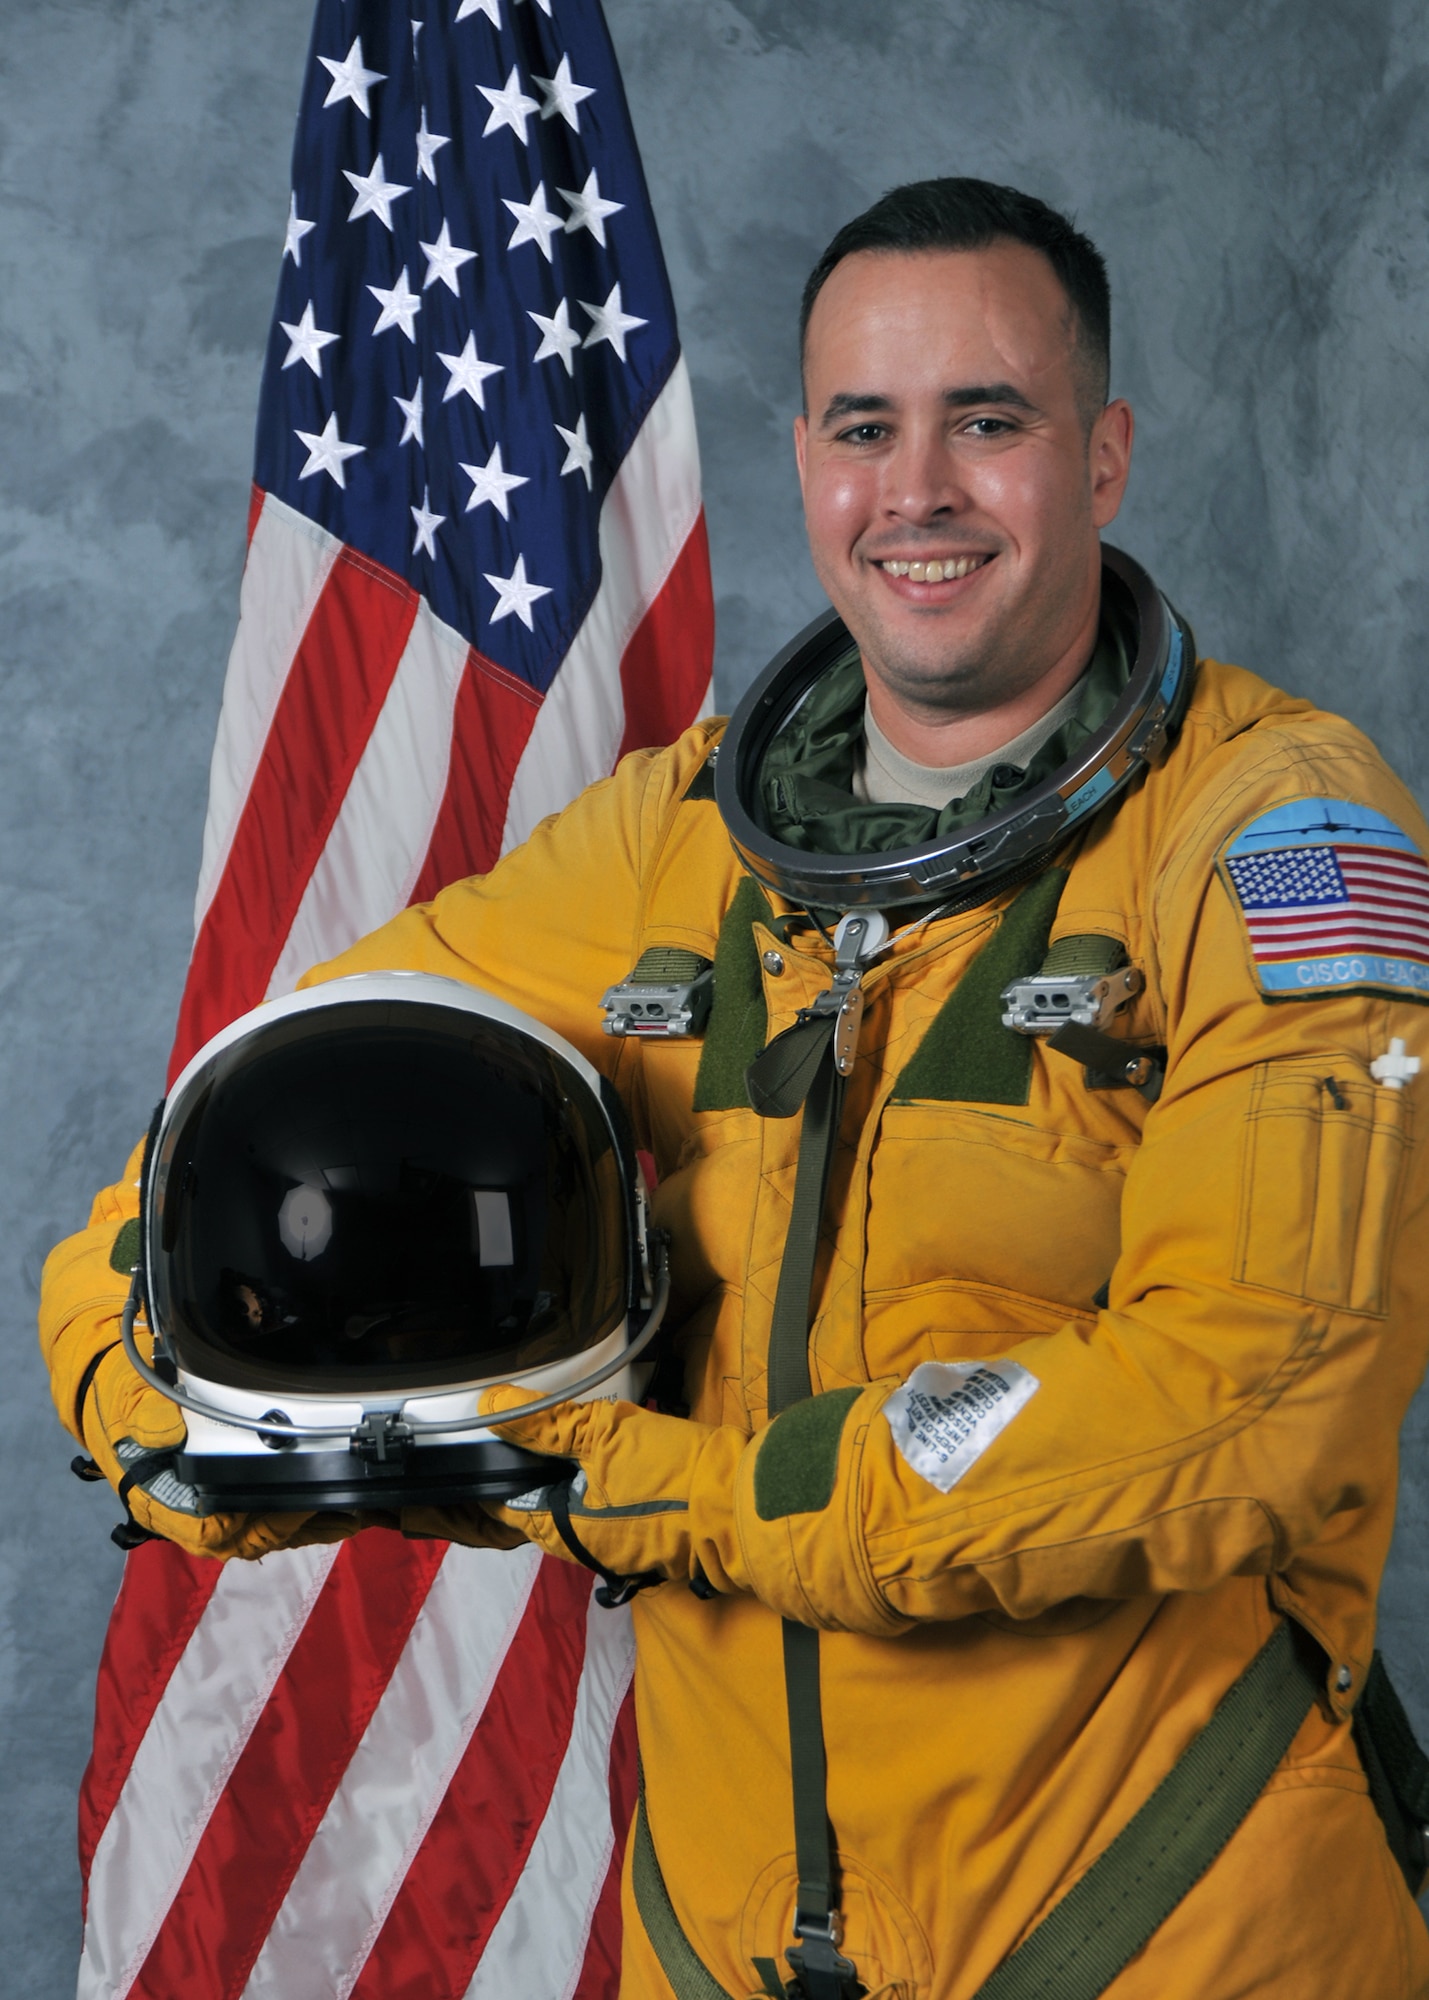 Maj. Francisco Leach, former U-2 pilot and current deputy chief of safety, 25th Air Force, has been recognized as the 2016 Presidential Advance Agent of the Year.